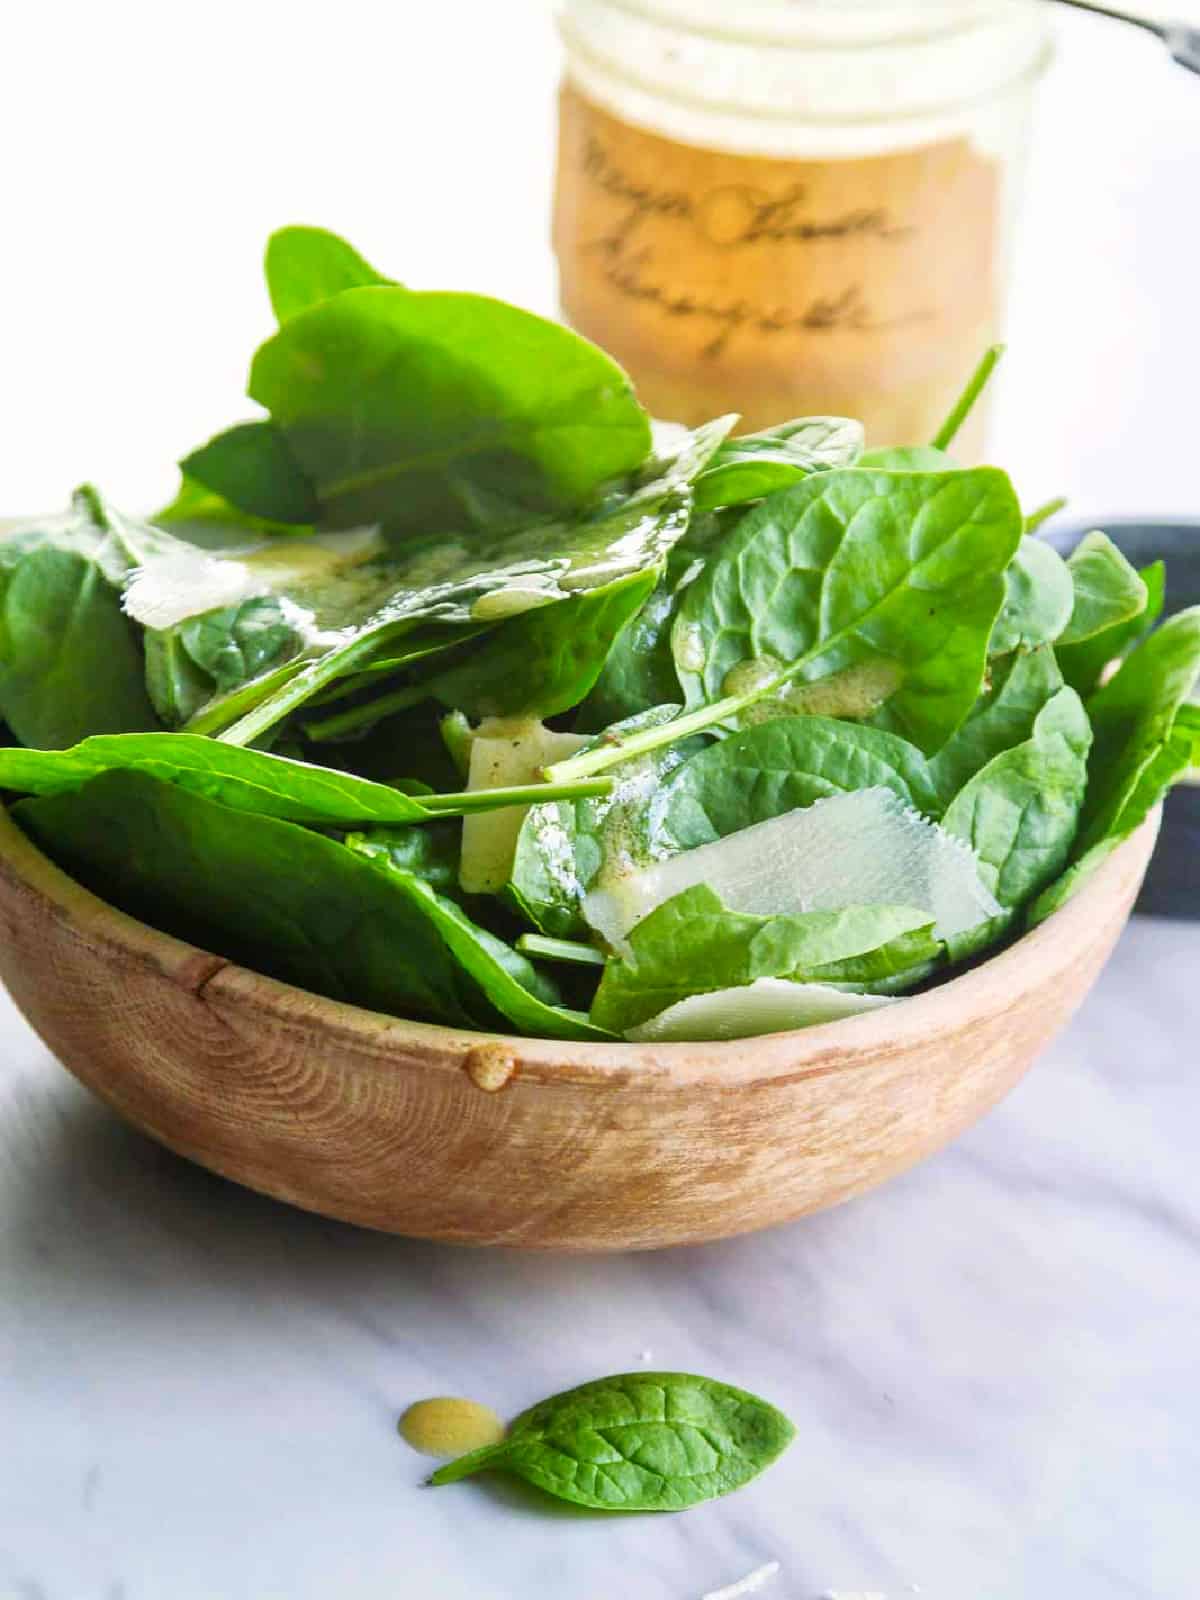 A small wooden bowl filled with fresh spinach, parmesan cheese shavings and vinaigrette.